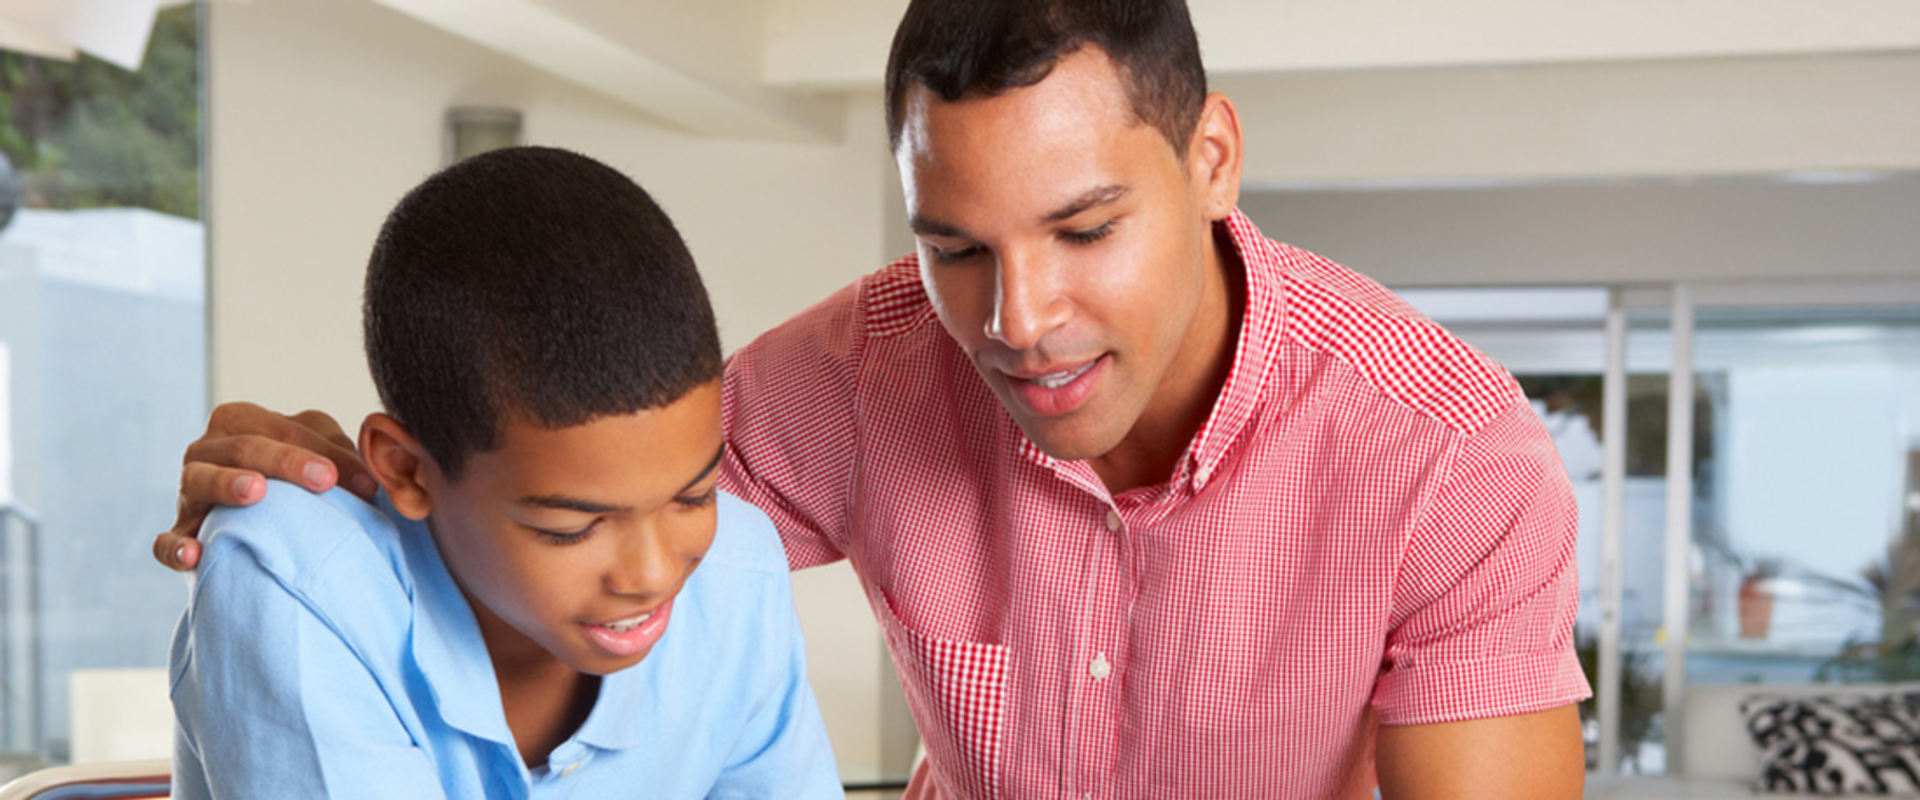 The Benefits of Tutoring: How a Tutor Can Help Students Succeed